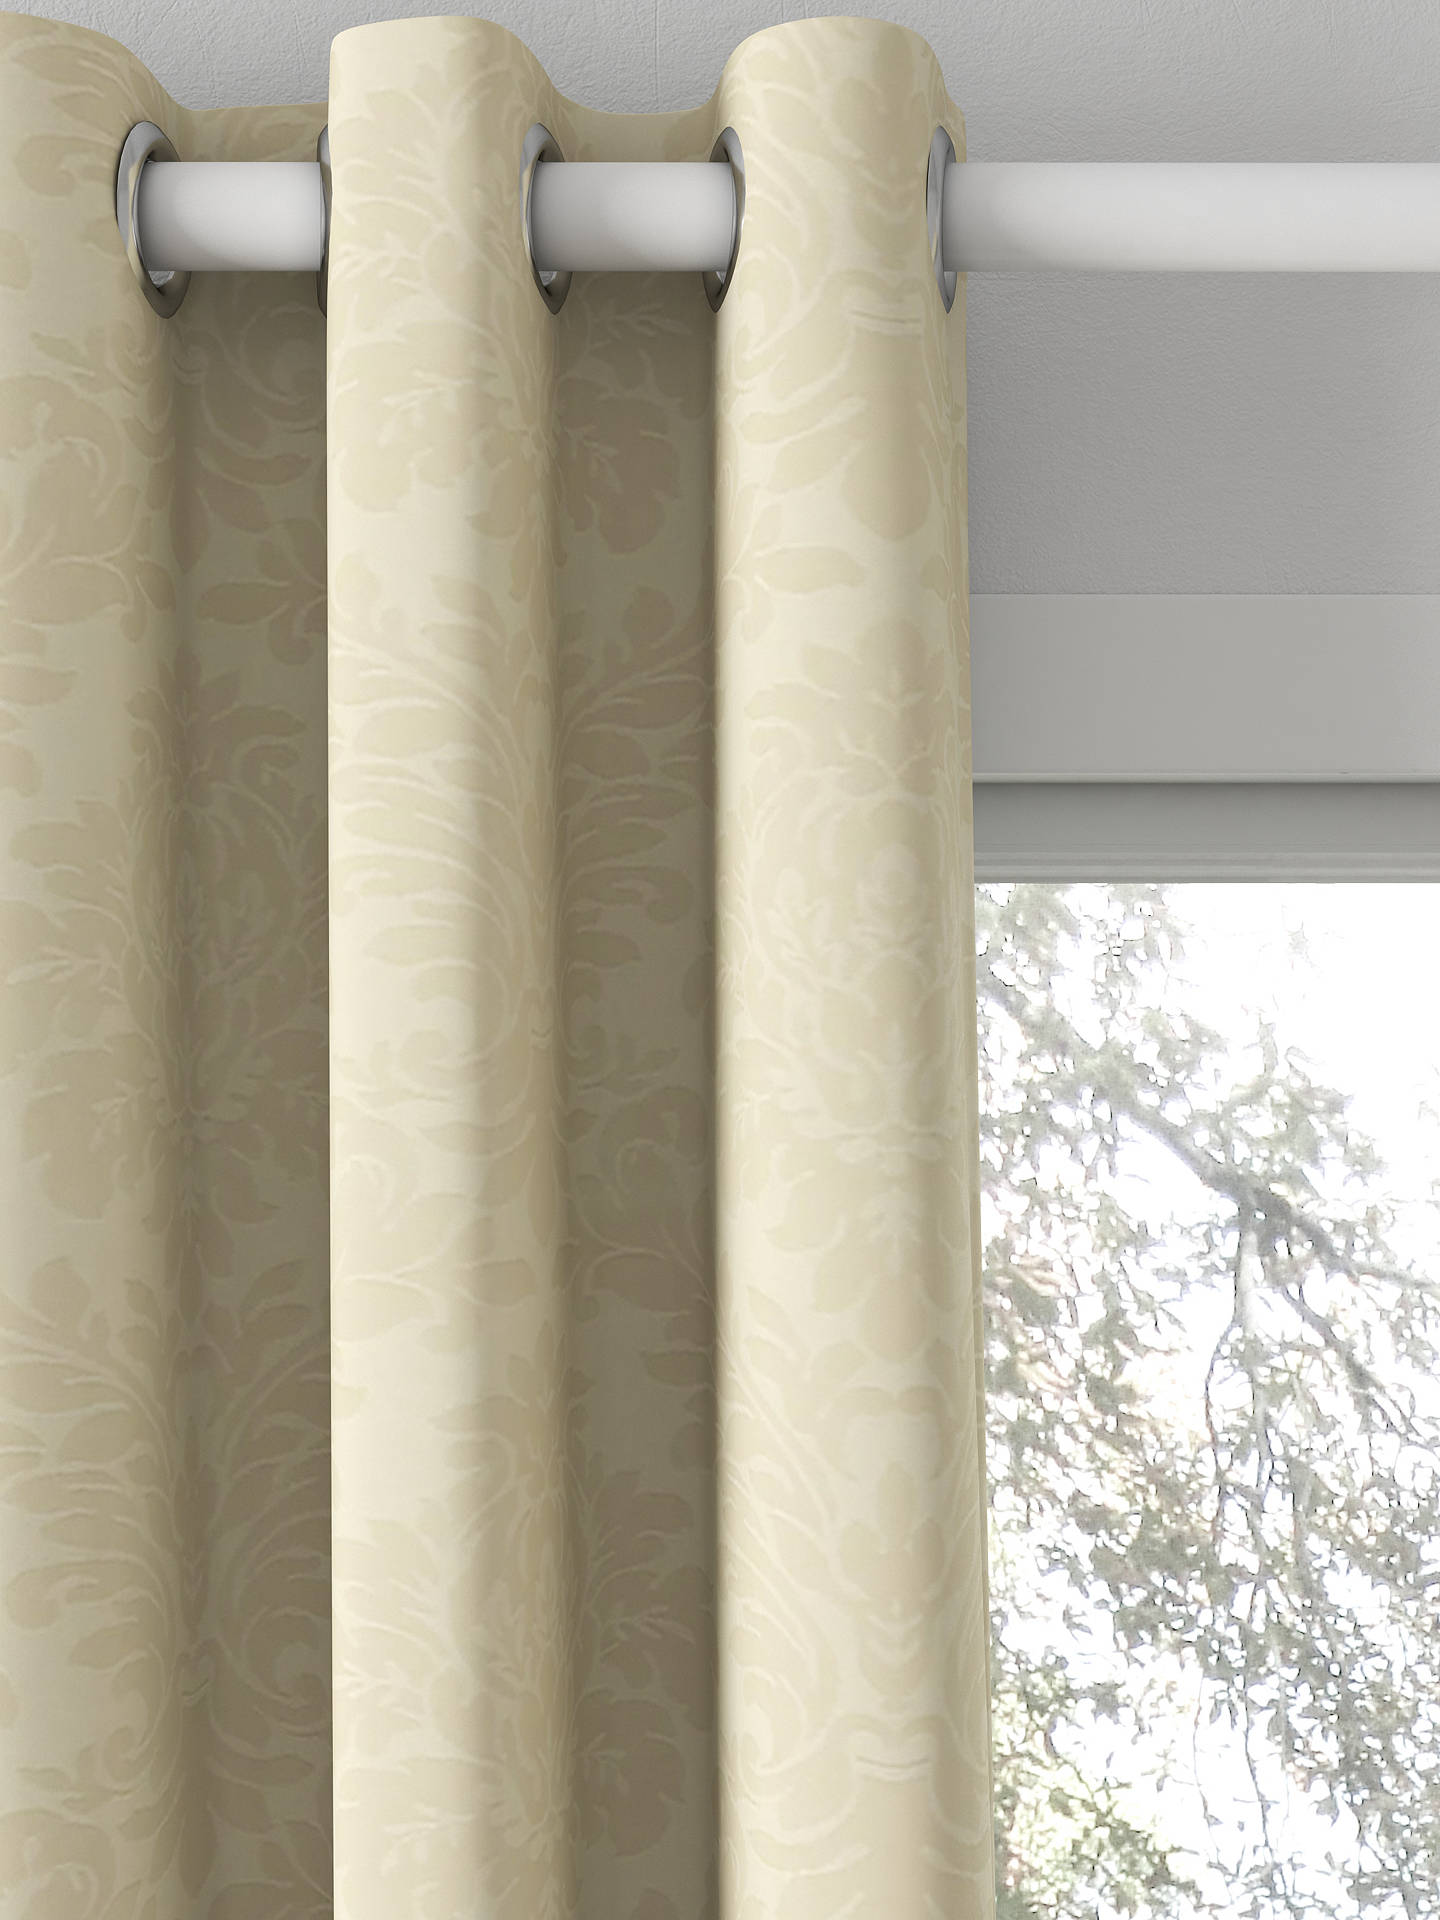 Sanderson Lymington Damask Made to Measure Curtains, White Clay